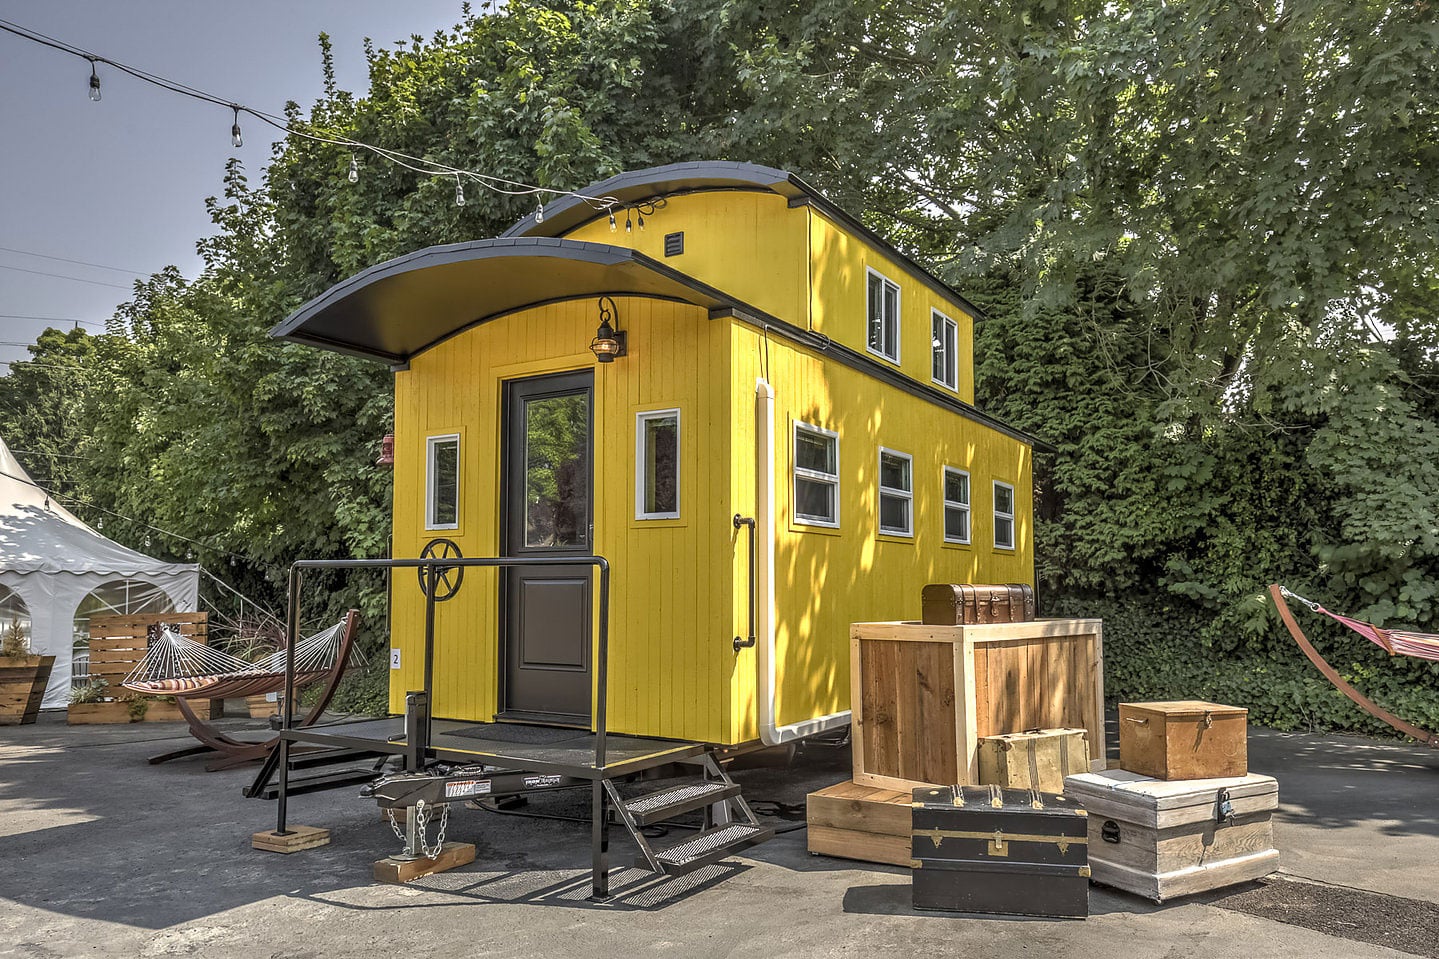 A quirky yellow tiny home serving as a unit in a tiny house hotel